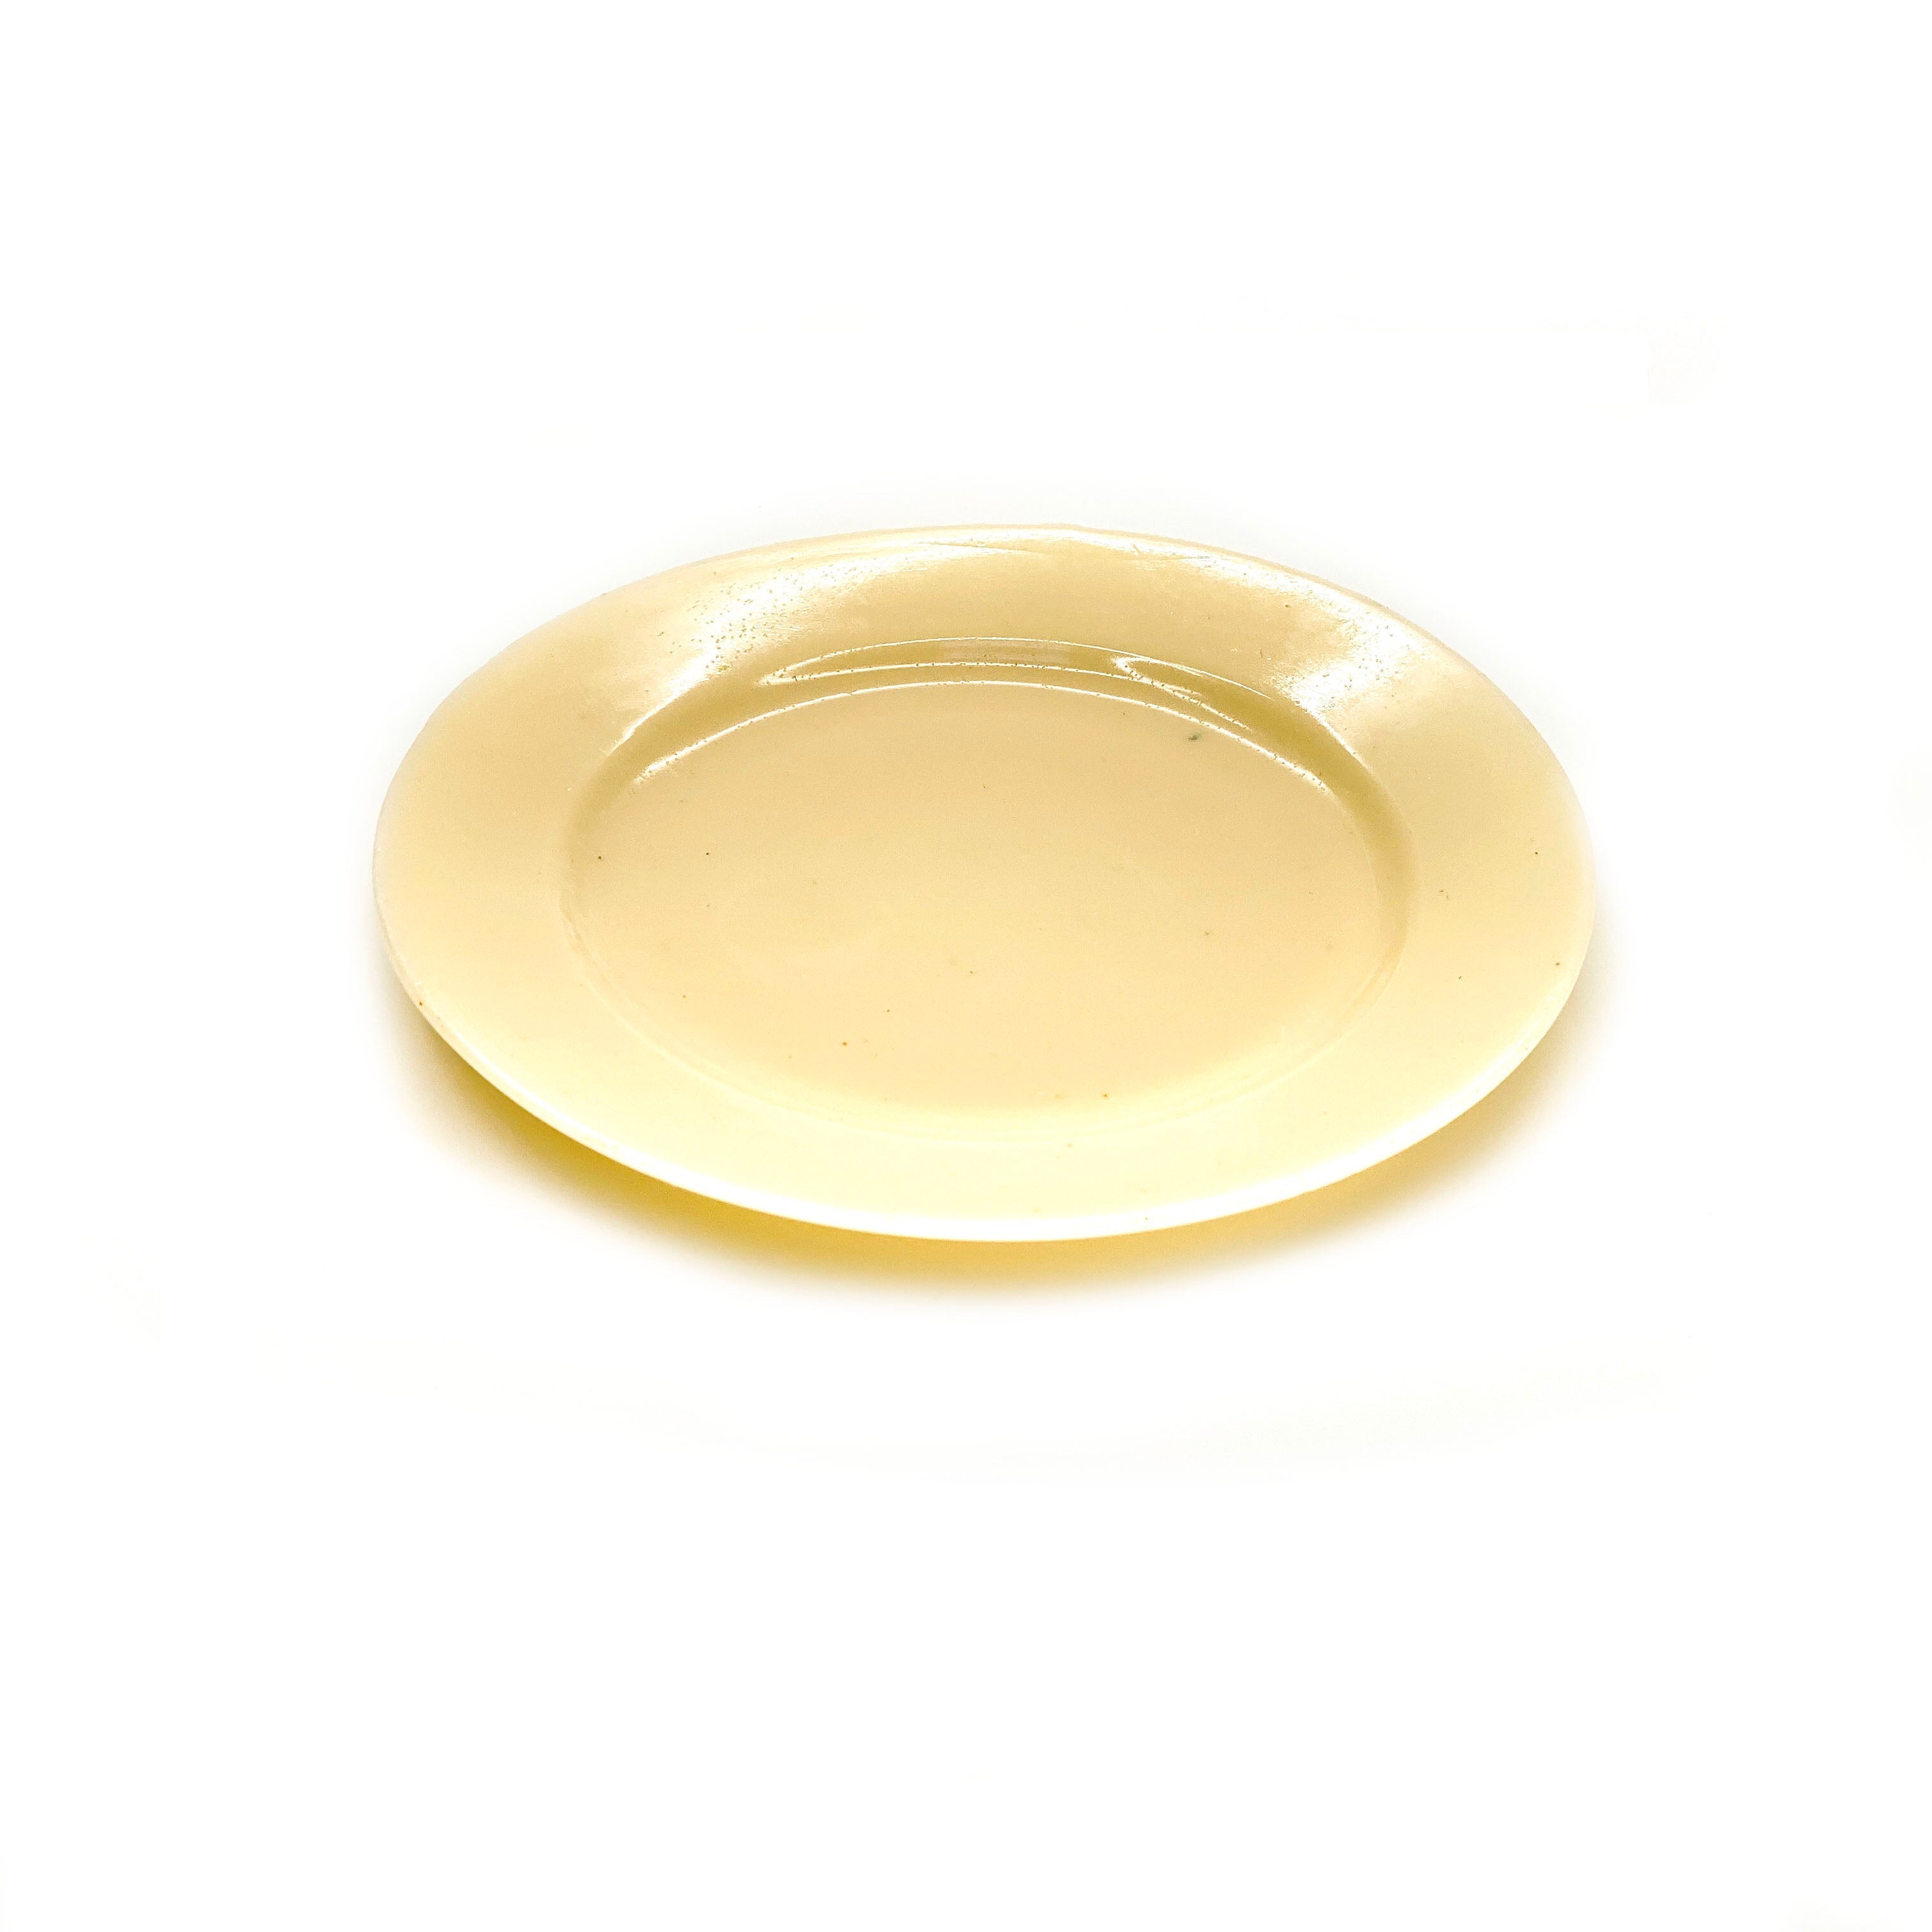 SMASHProps Breakaway Small Dinner Plate Prop - WHITE - White,Opaque